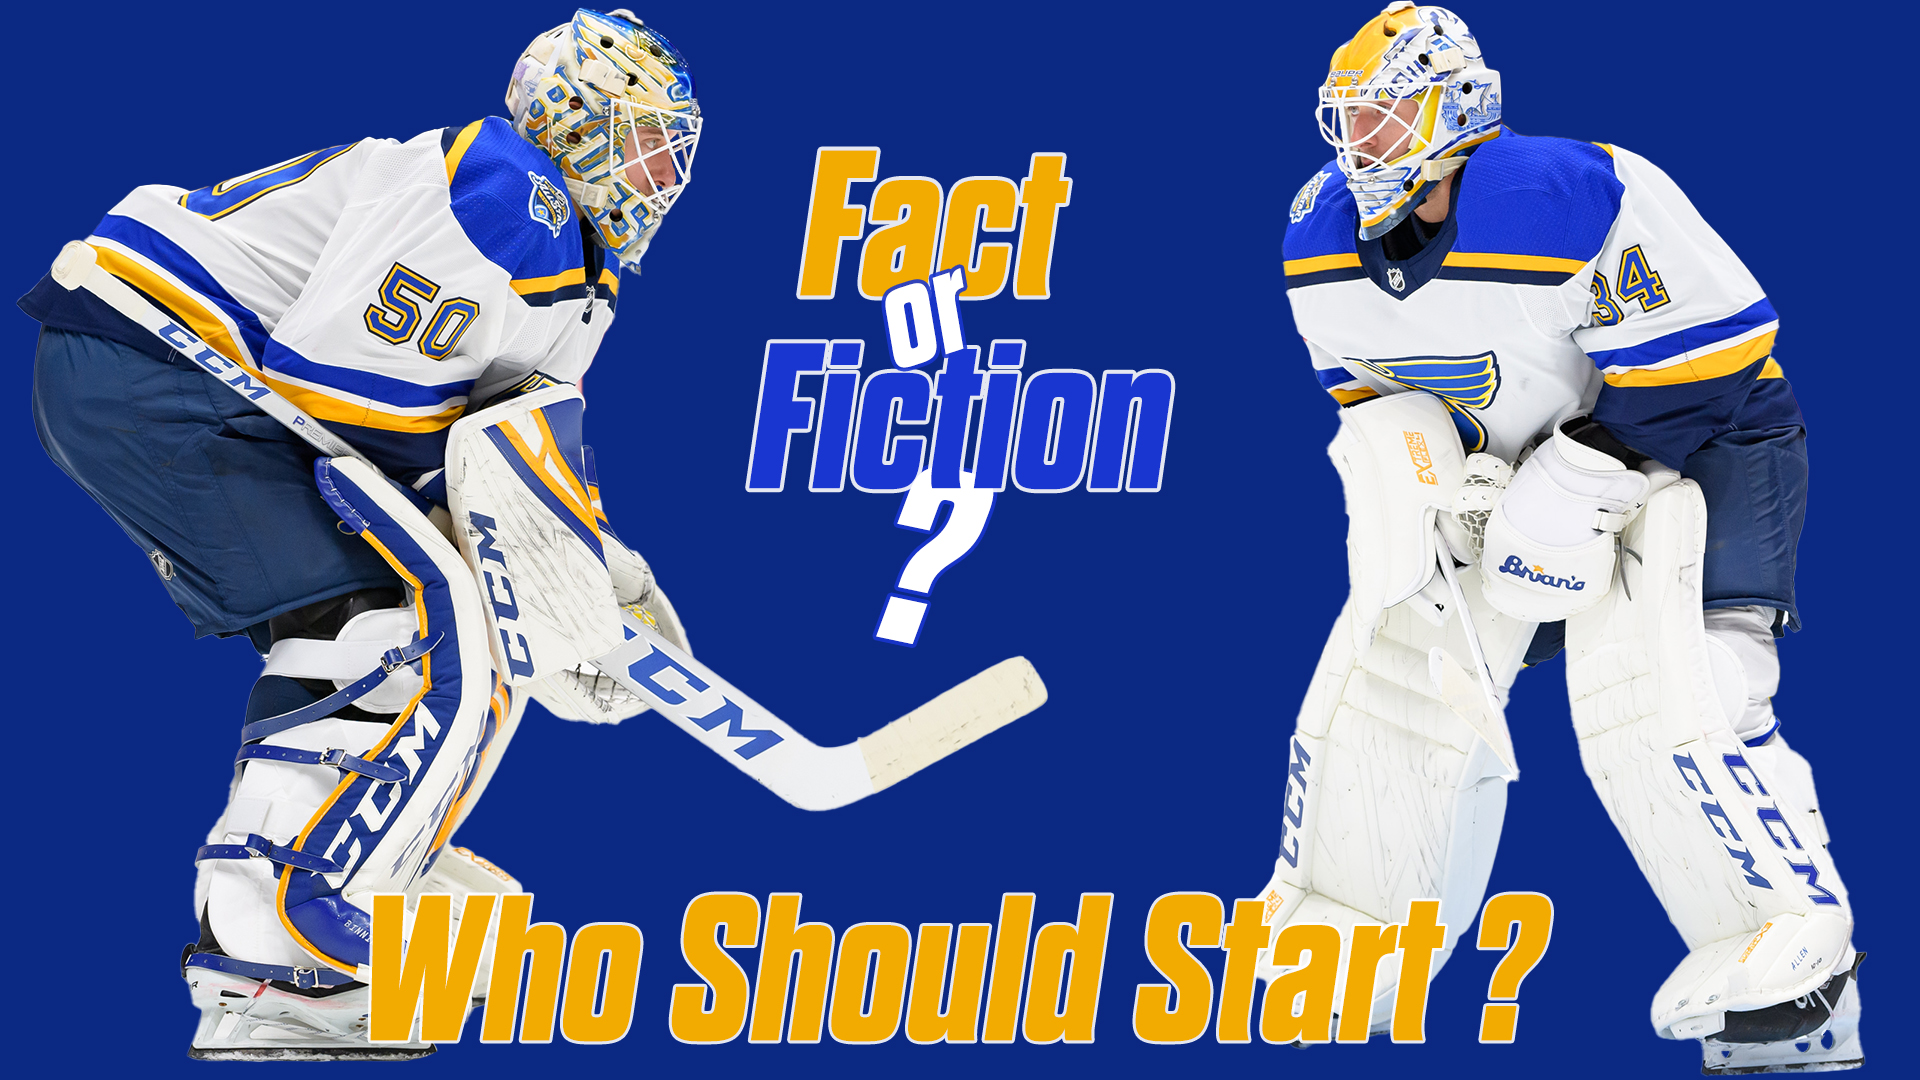 Fact or Fiction? Who Should Start the Real Playoffs